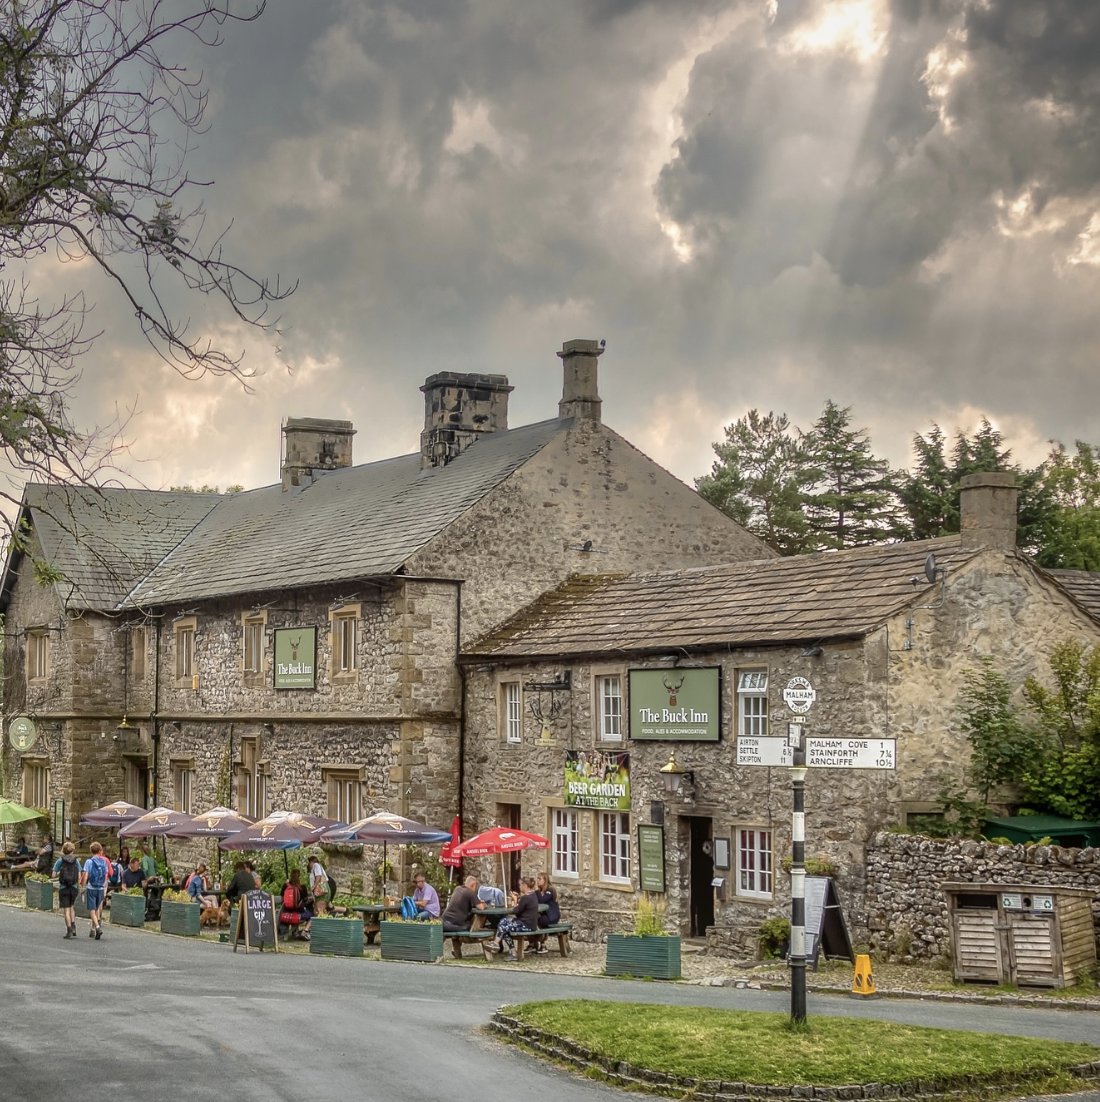 Dreaming of summer evenings at the pub 🤩.

Have you made your holiday plans for this year yet?

📸 ascotography on Instagram

#PhotosOfBritain #YourBritain #GloriousBritain #WeLoveEngland  #VisitNorthYorkshire #VisitBritain #UKHiddenGems